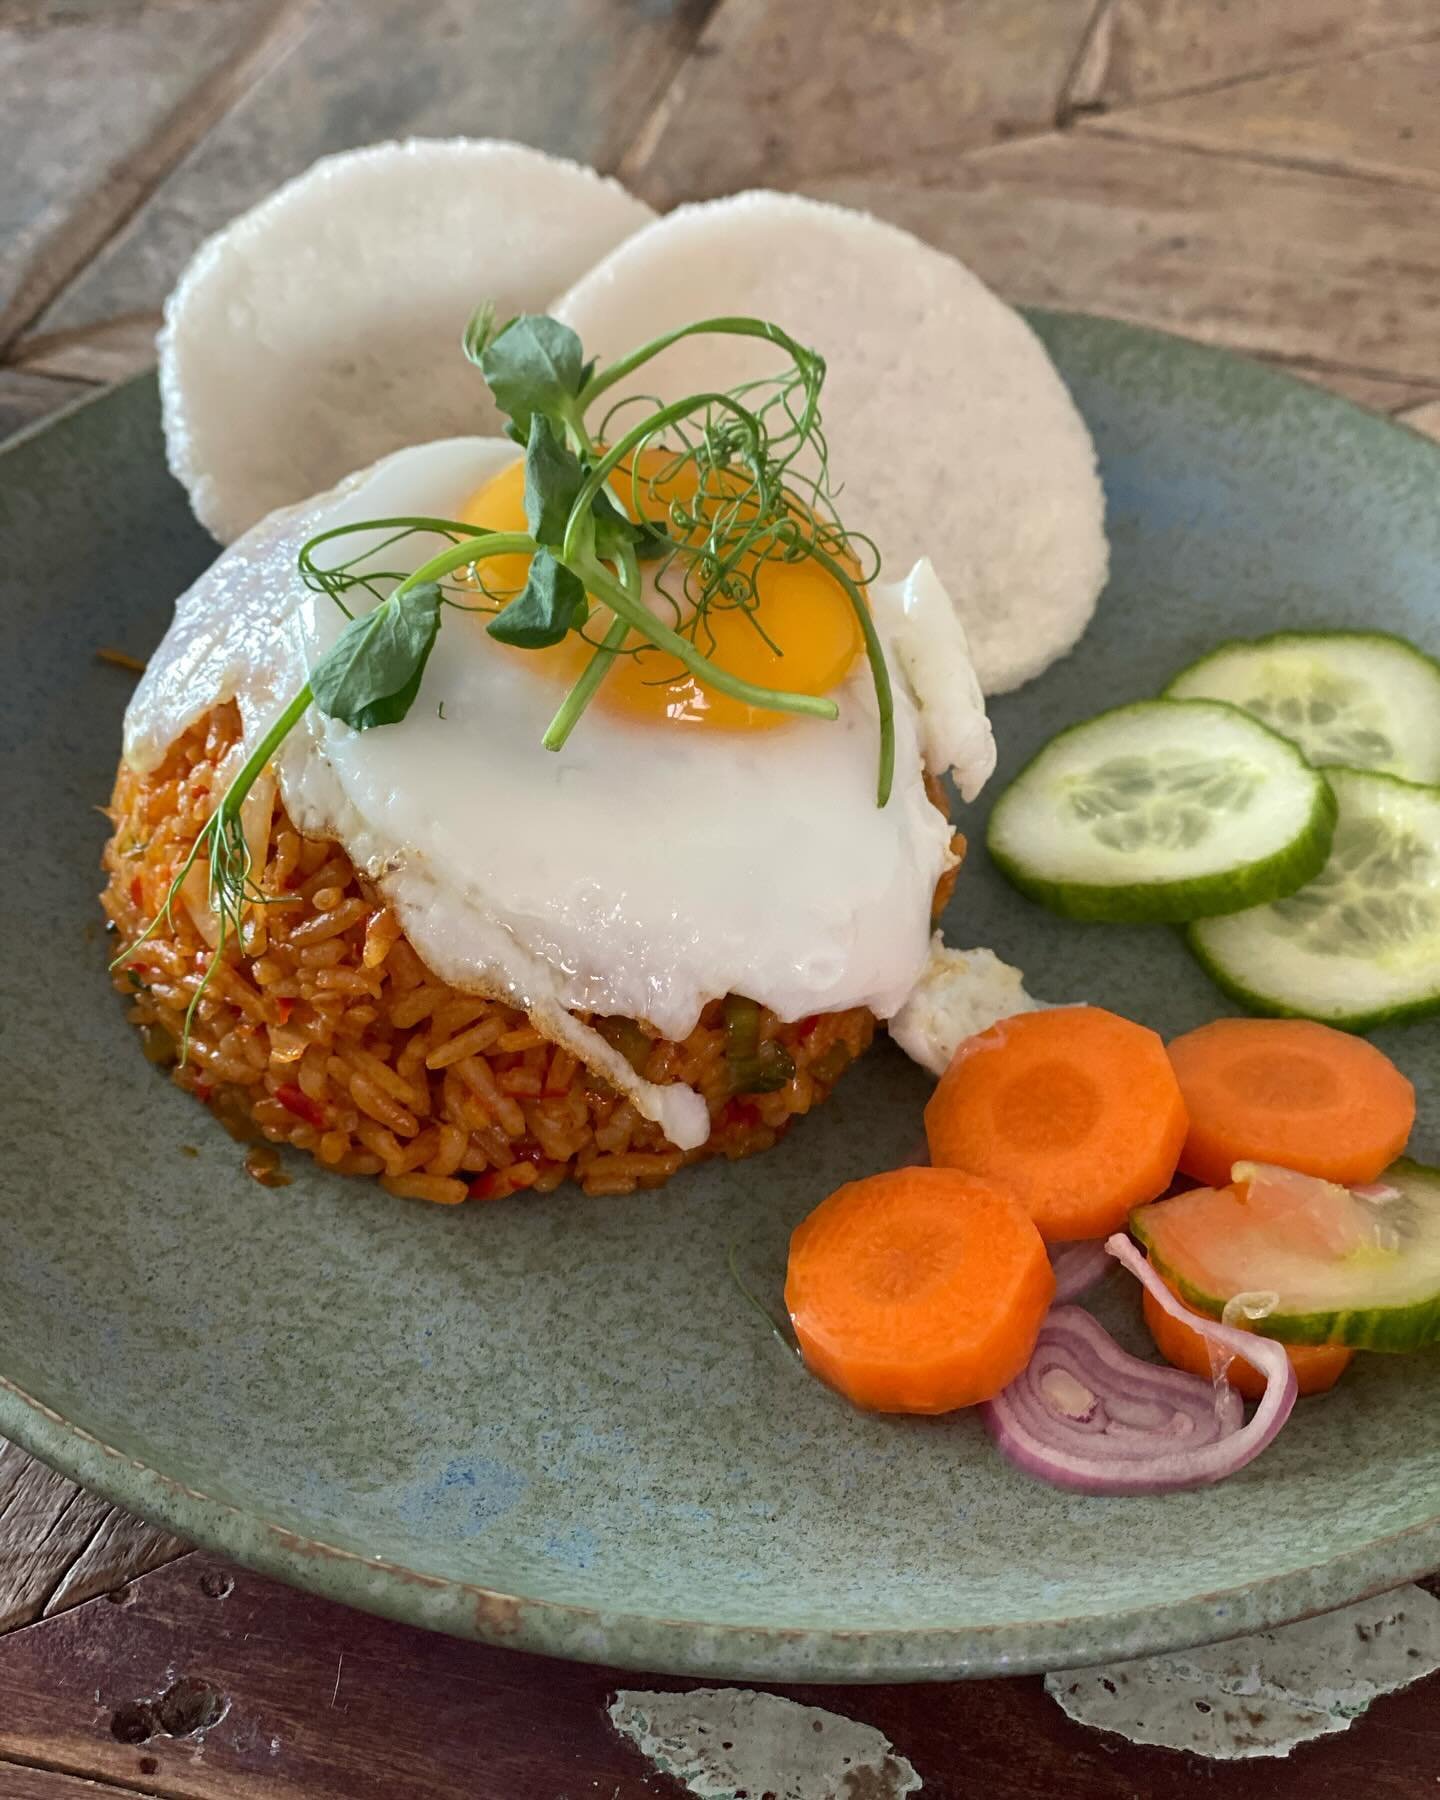 It&rsquo;s Bank Holiday Weekend! 
Indonesian Specials on the menu- the ultimate classic Nasi Goreng with/ without beef satay 😊
And yes our Pandan Cake with Lemon Curd and Mascarpone Icing 💚
Available all weekend. 
.
.
.
.
#indonesianfood #leamingto